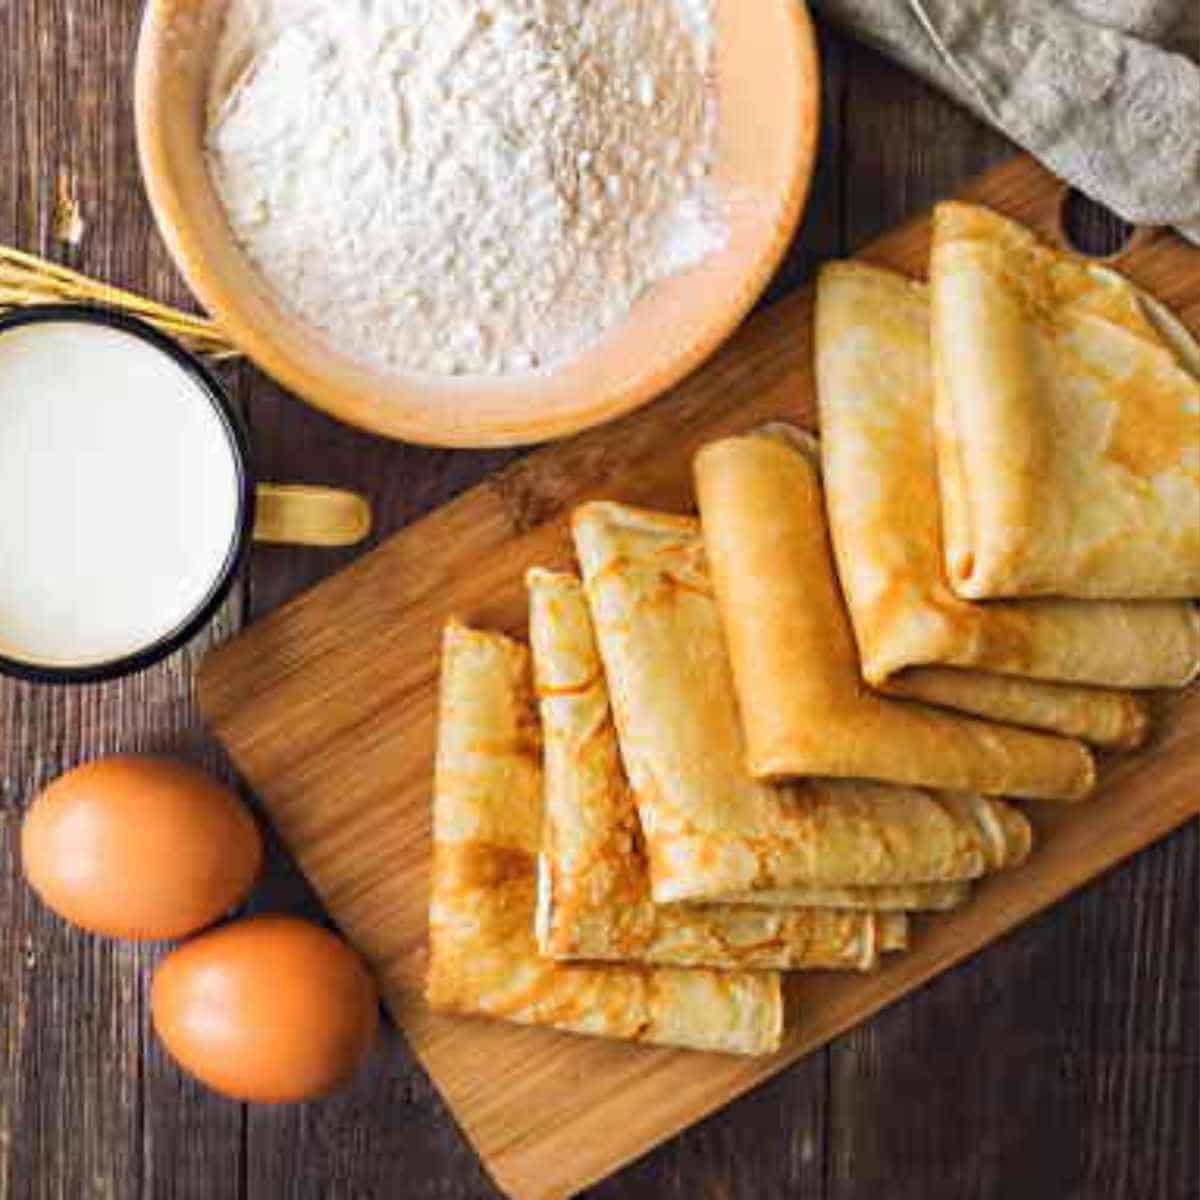 Six folded crepes on a wooden board surrounded with two eggs, salt and flour.